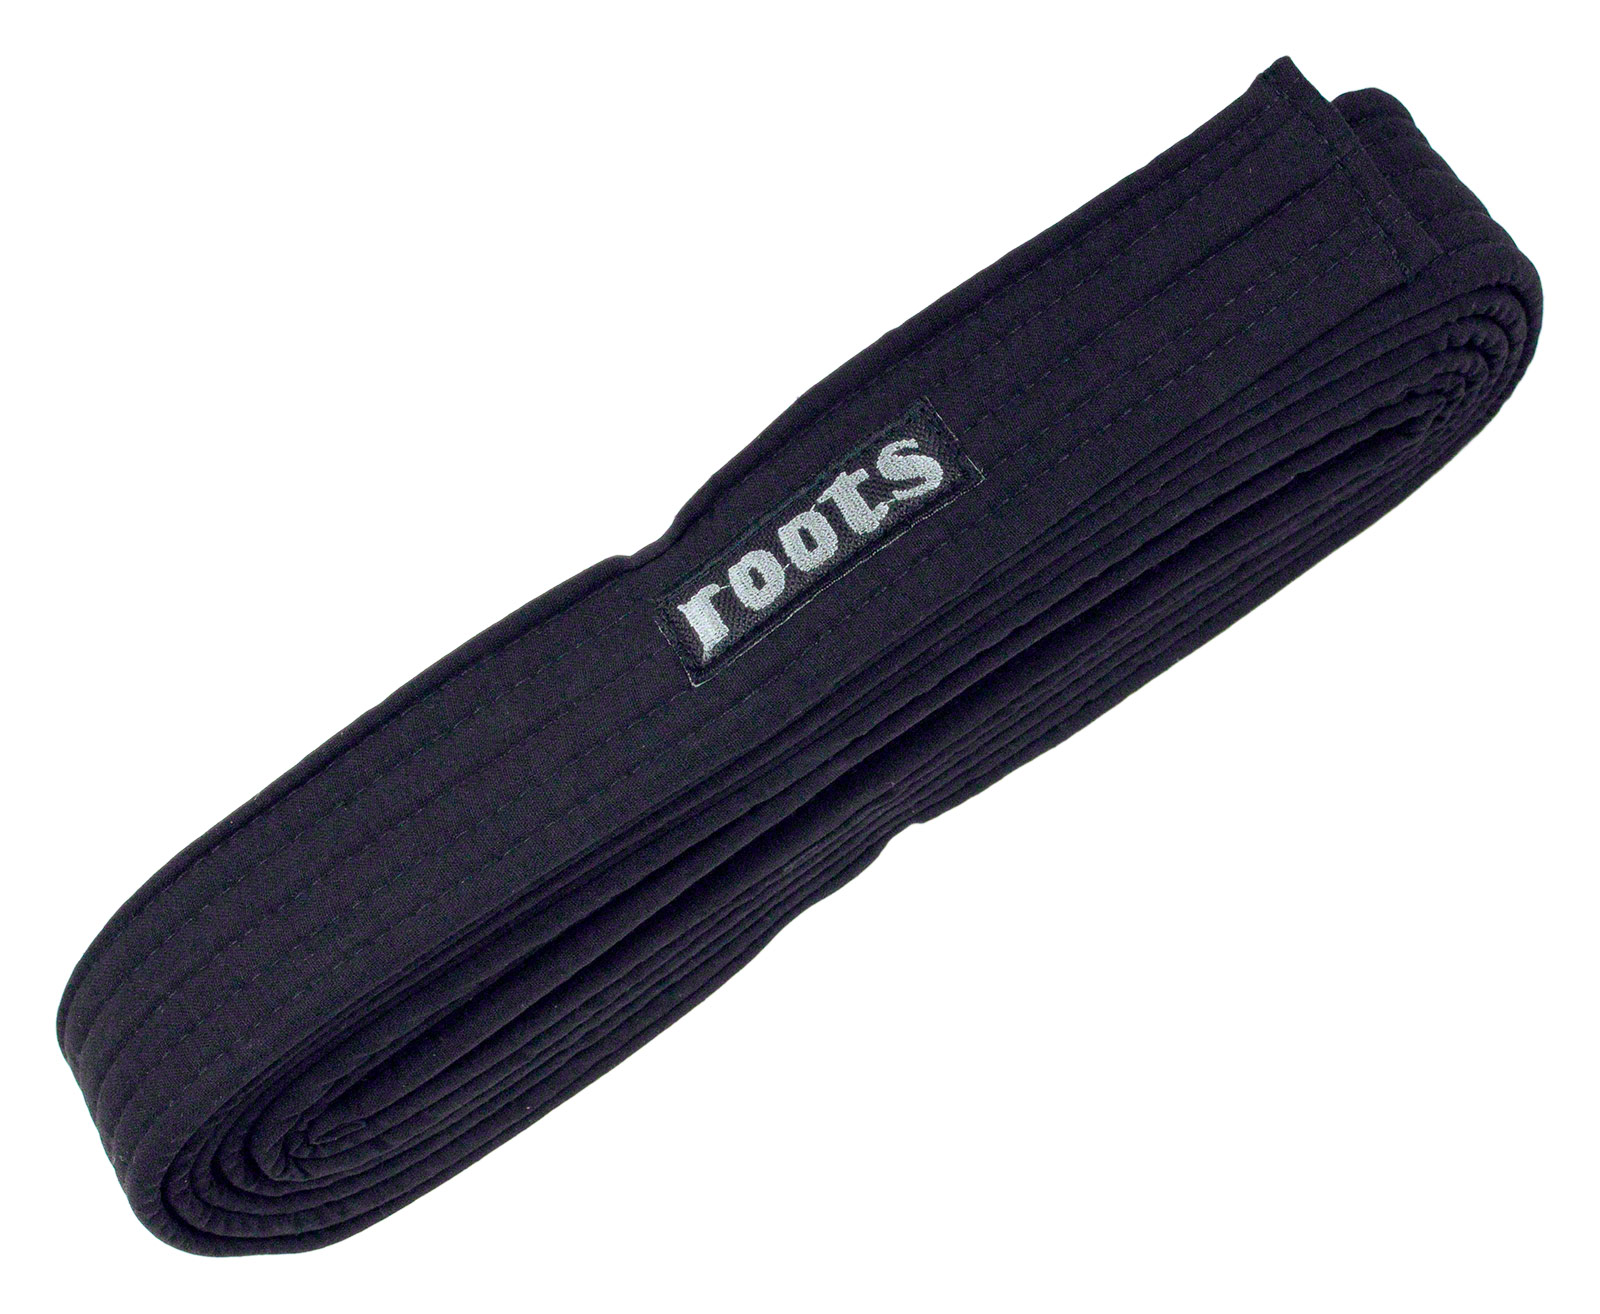 ROOTS PERCUSSION 4.40M PADDED COTTON DJEMBE STRAP - BLACK